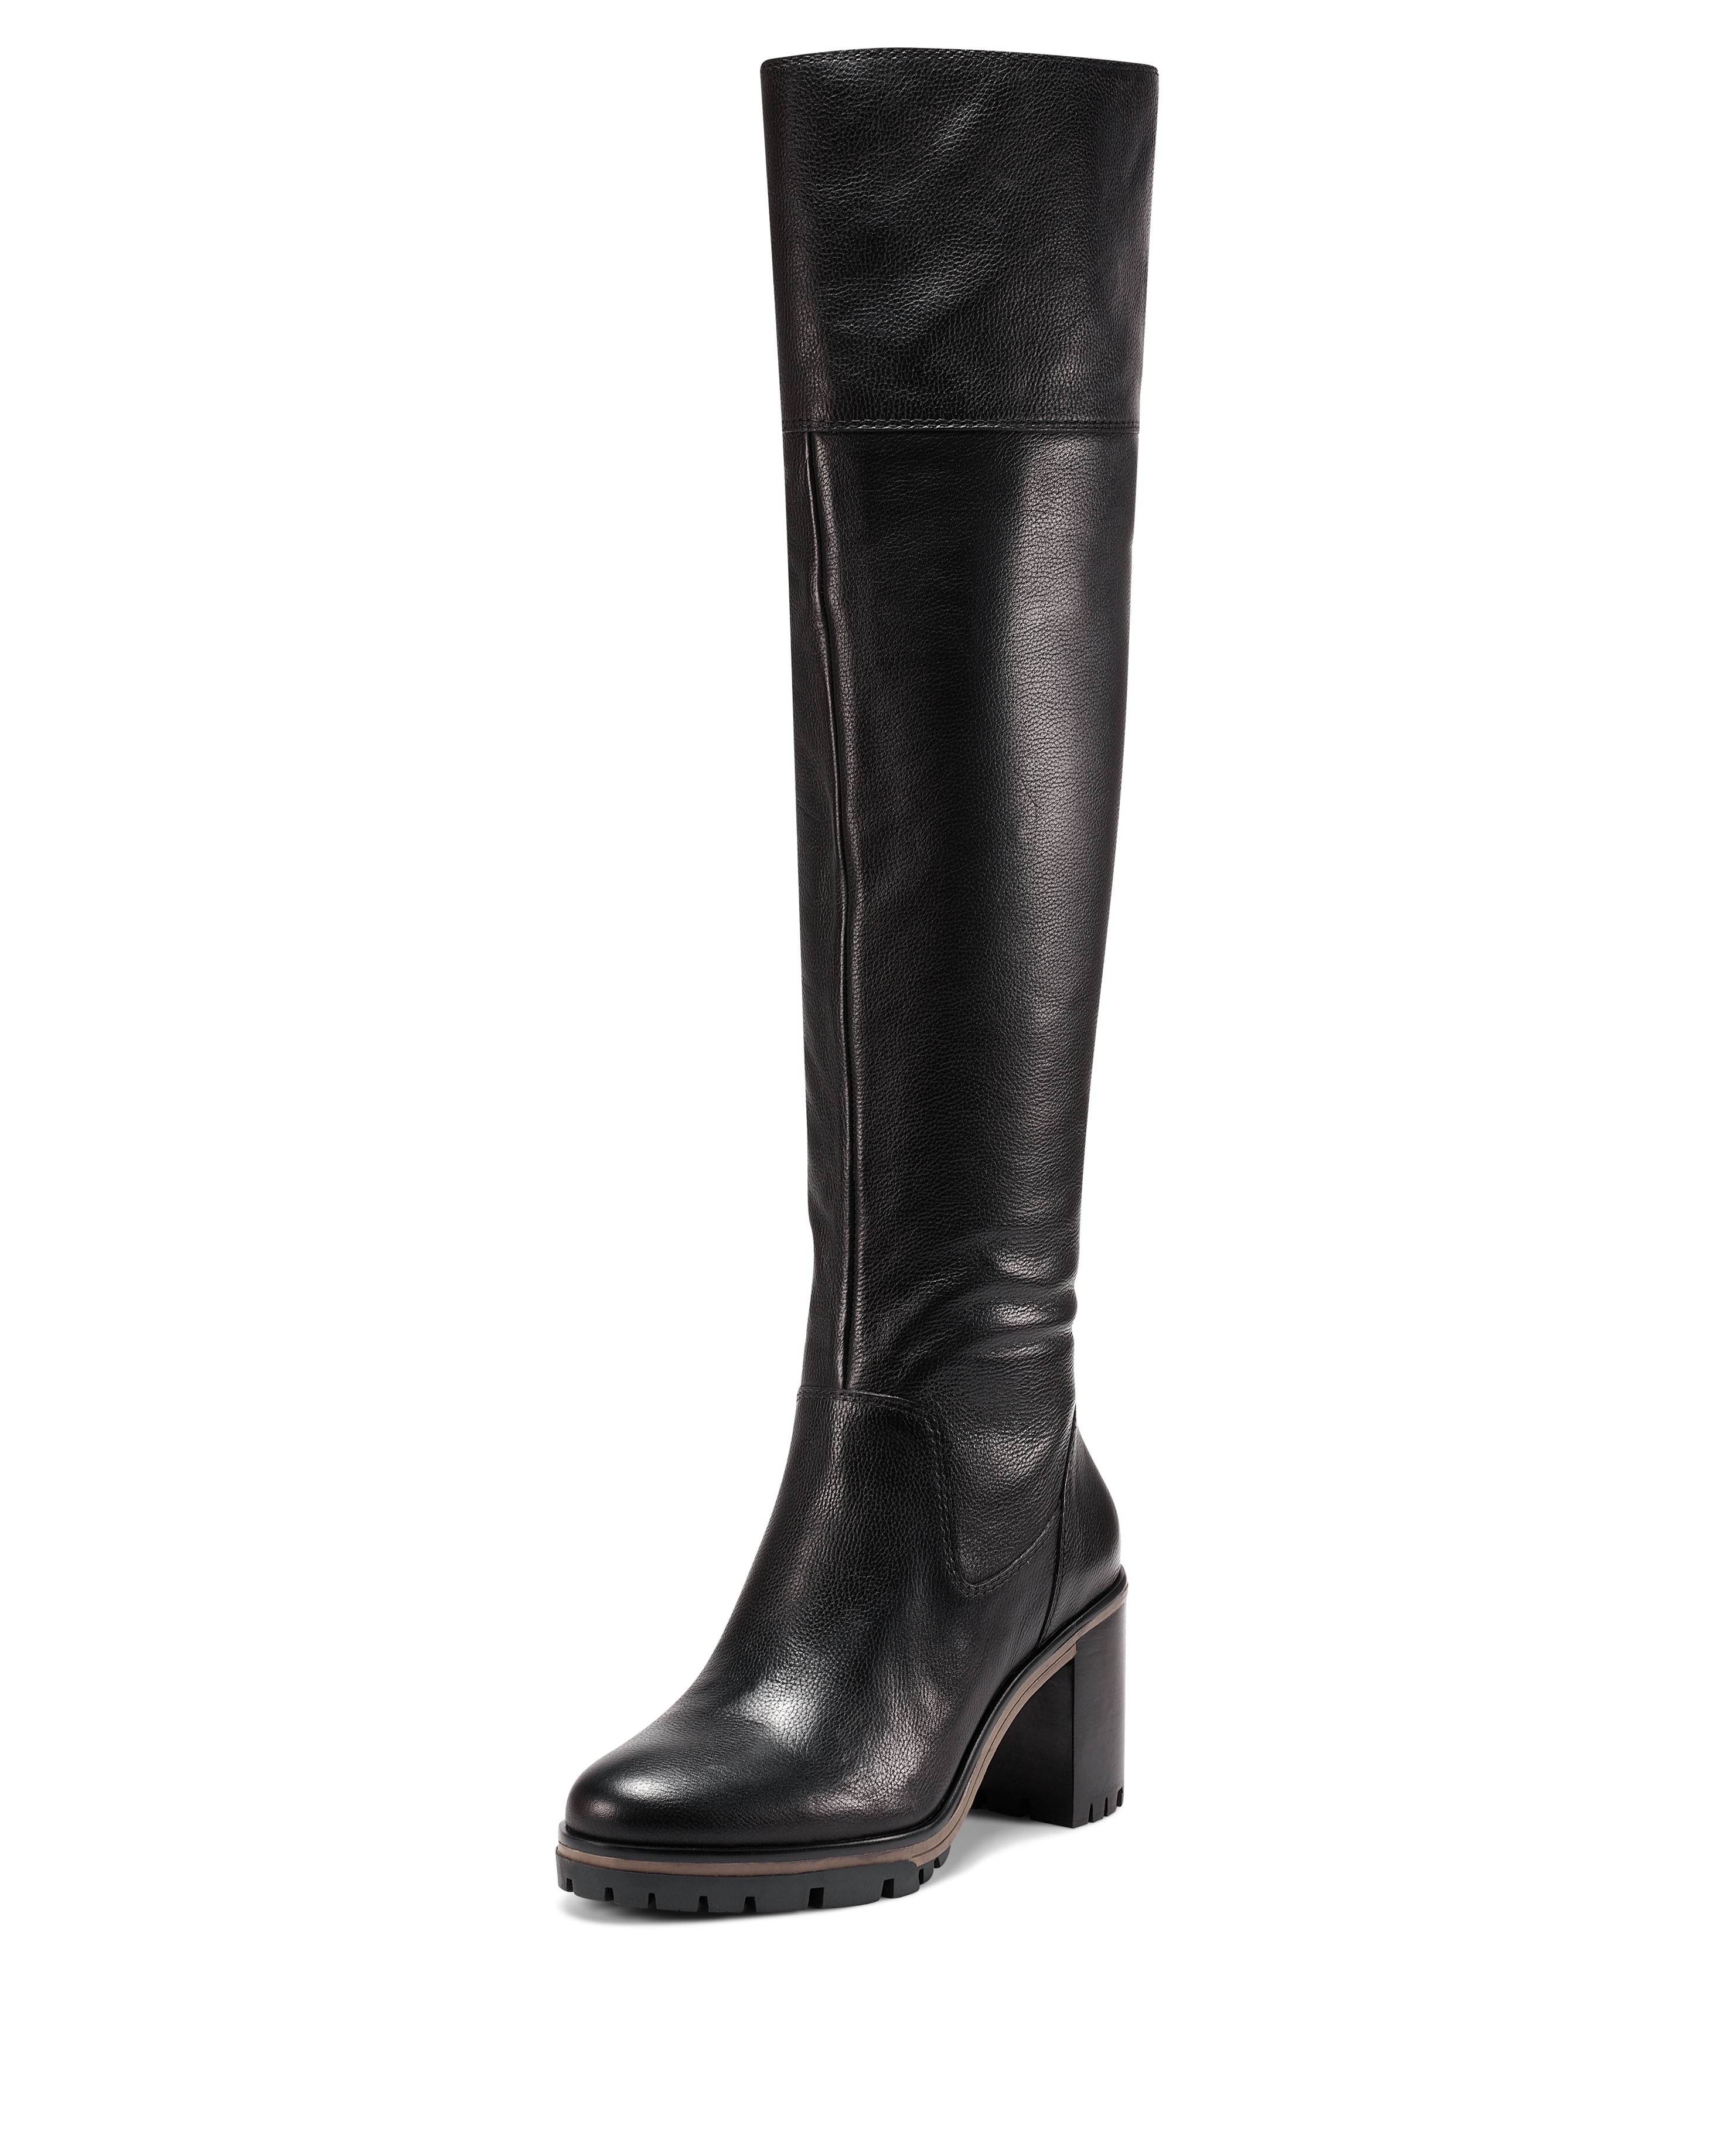 Vince Camuto Dasemma Black Leather Over The Knee Chunky Heel Leather Boots  (Black, 7.5) 